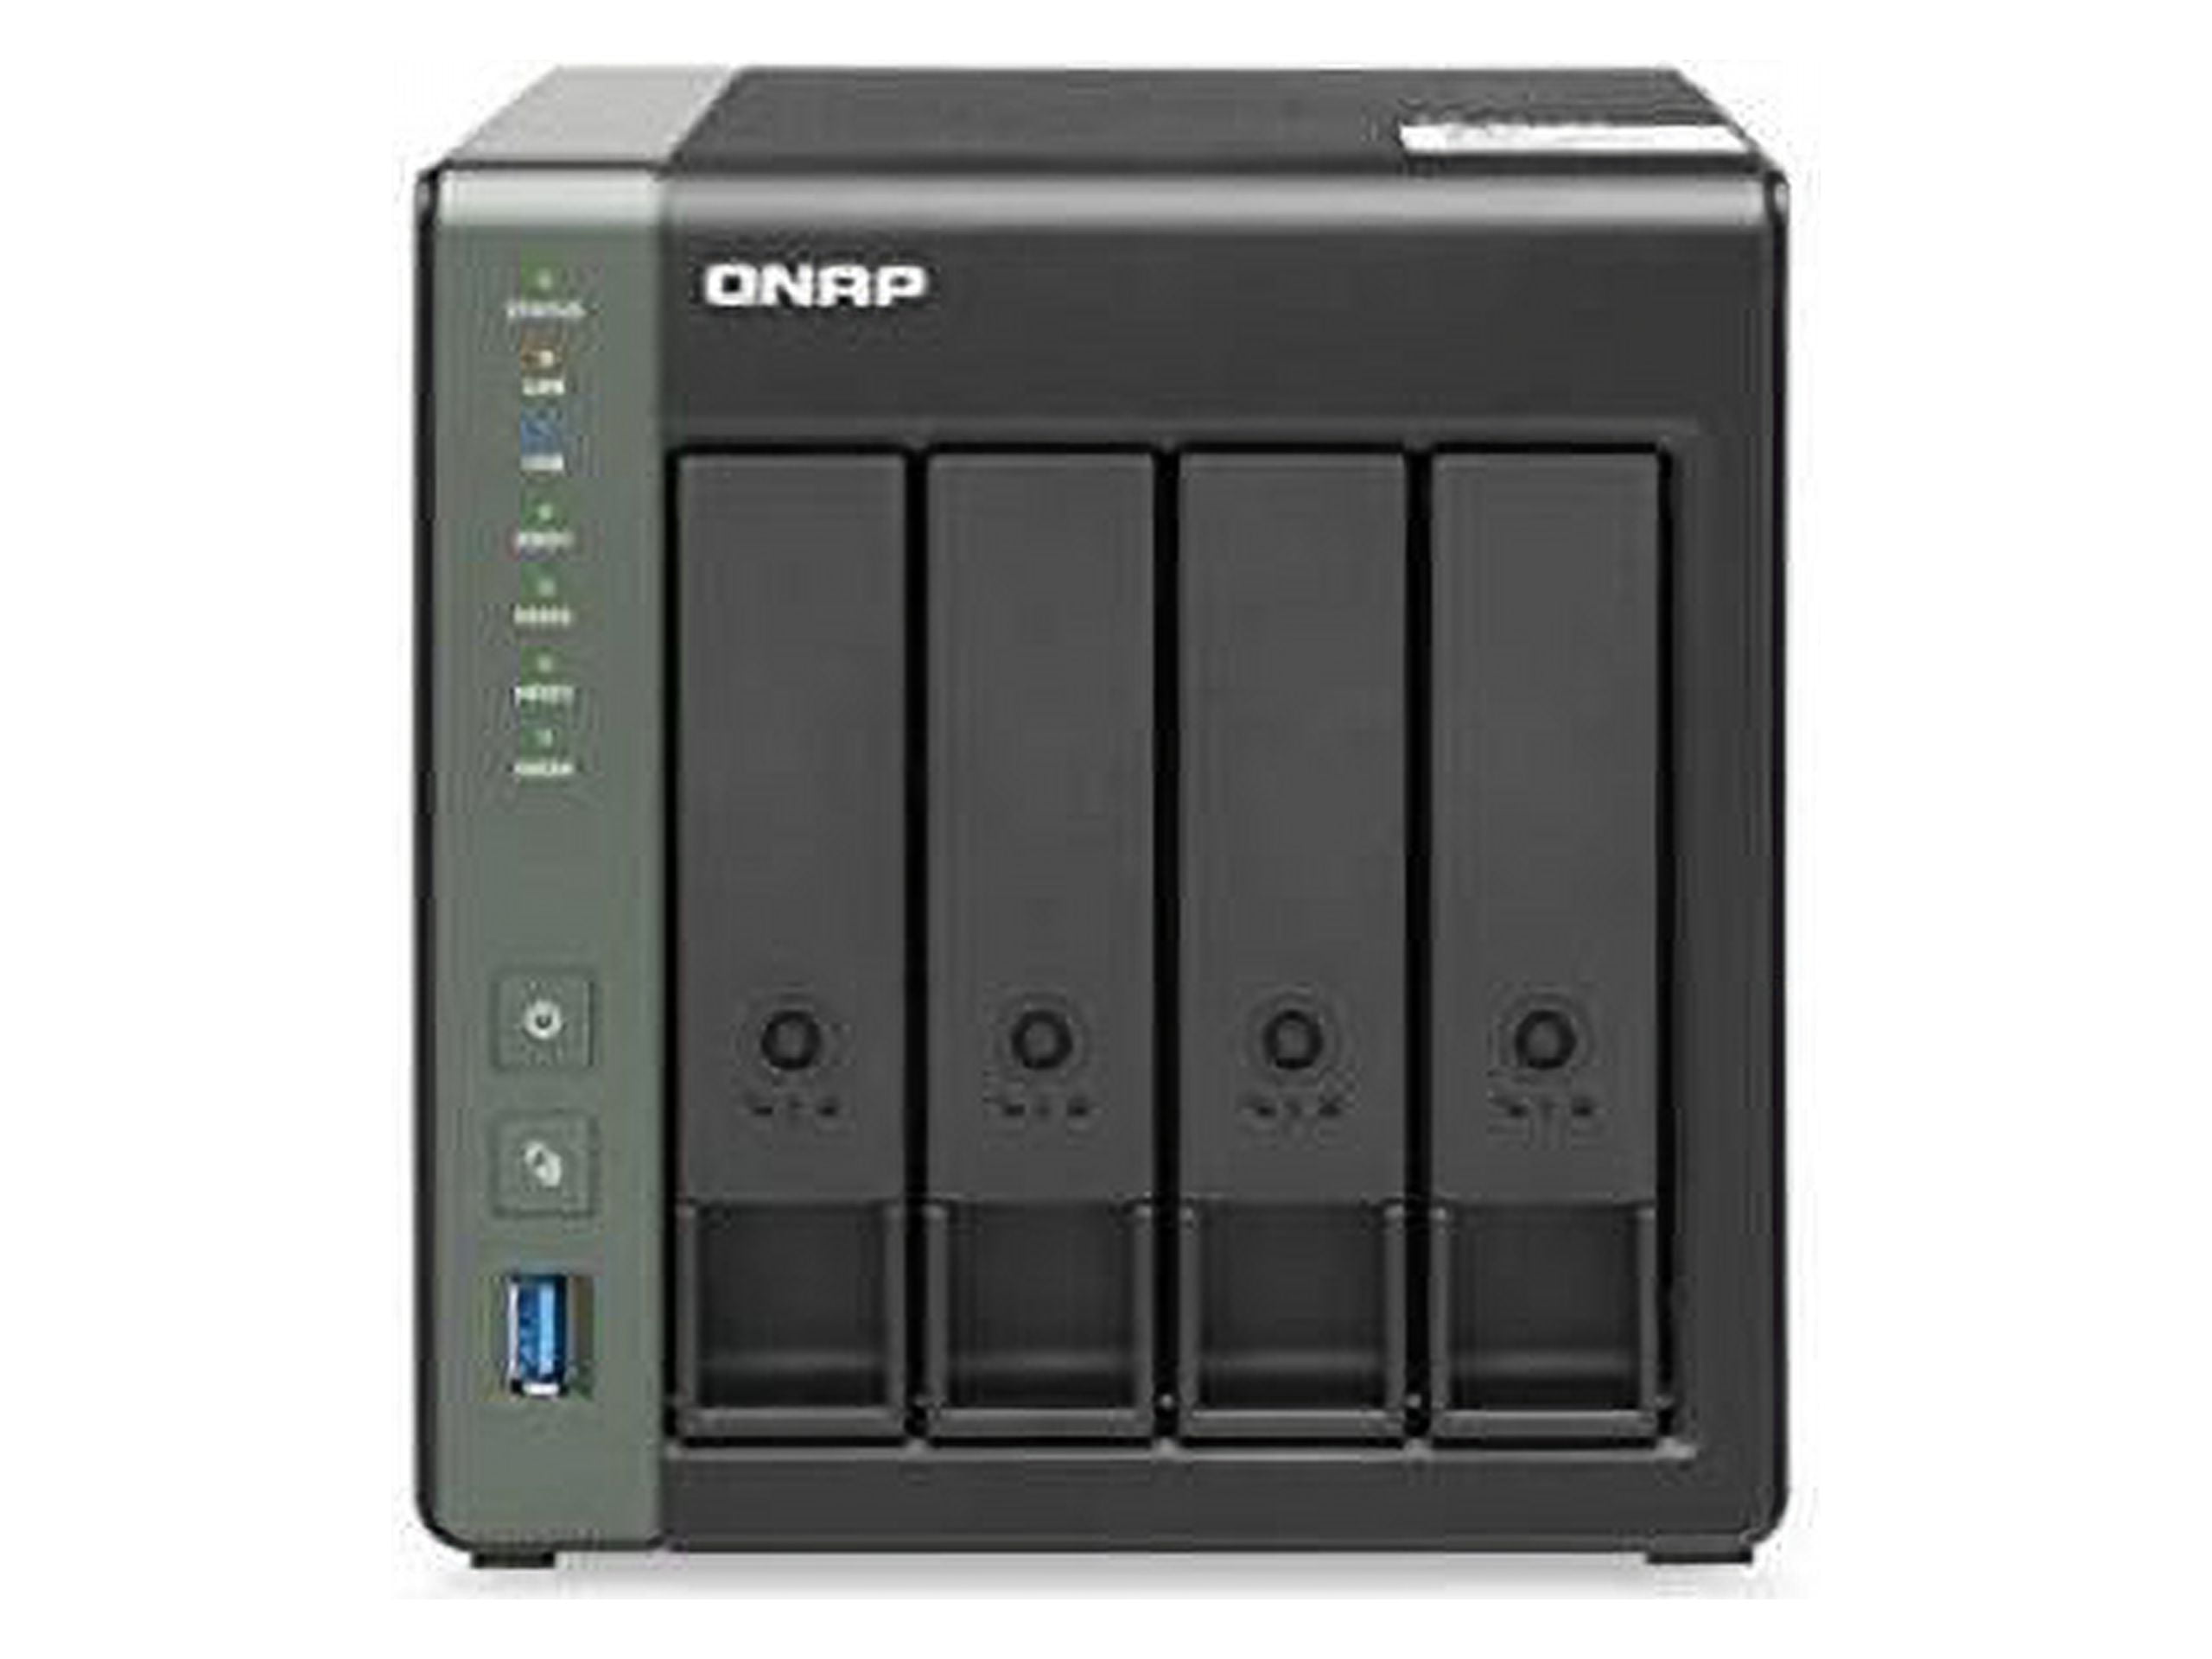 Top Rated Products in Network Attached Storage